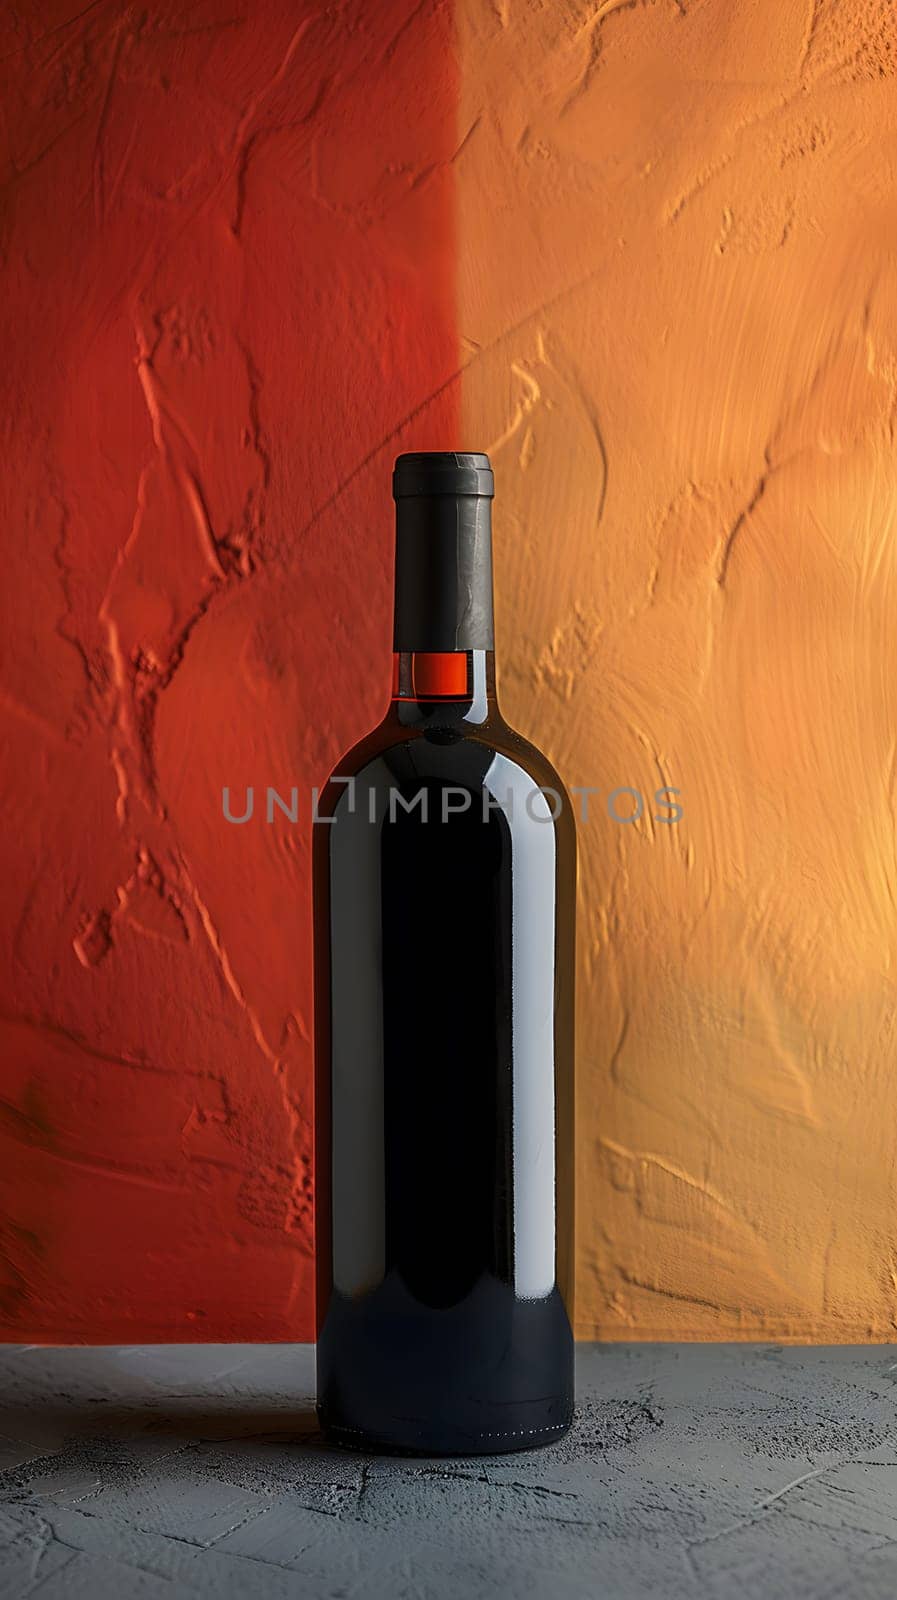 A glass bottle of red wine is displayed on a table against a red and gold wall, accompanied by a bottle stopper saver made of wood